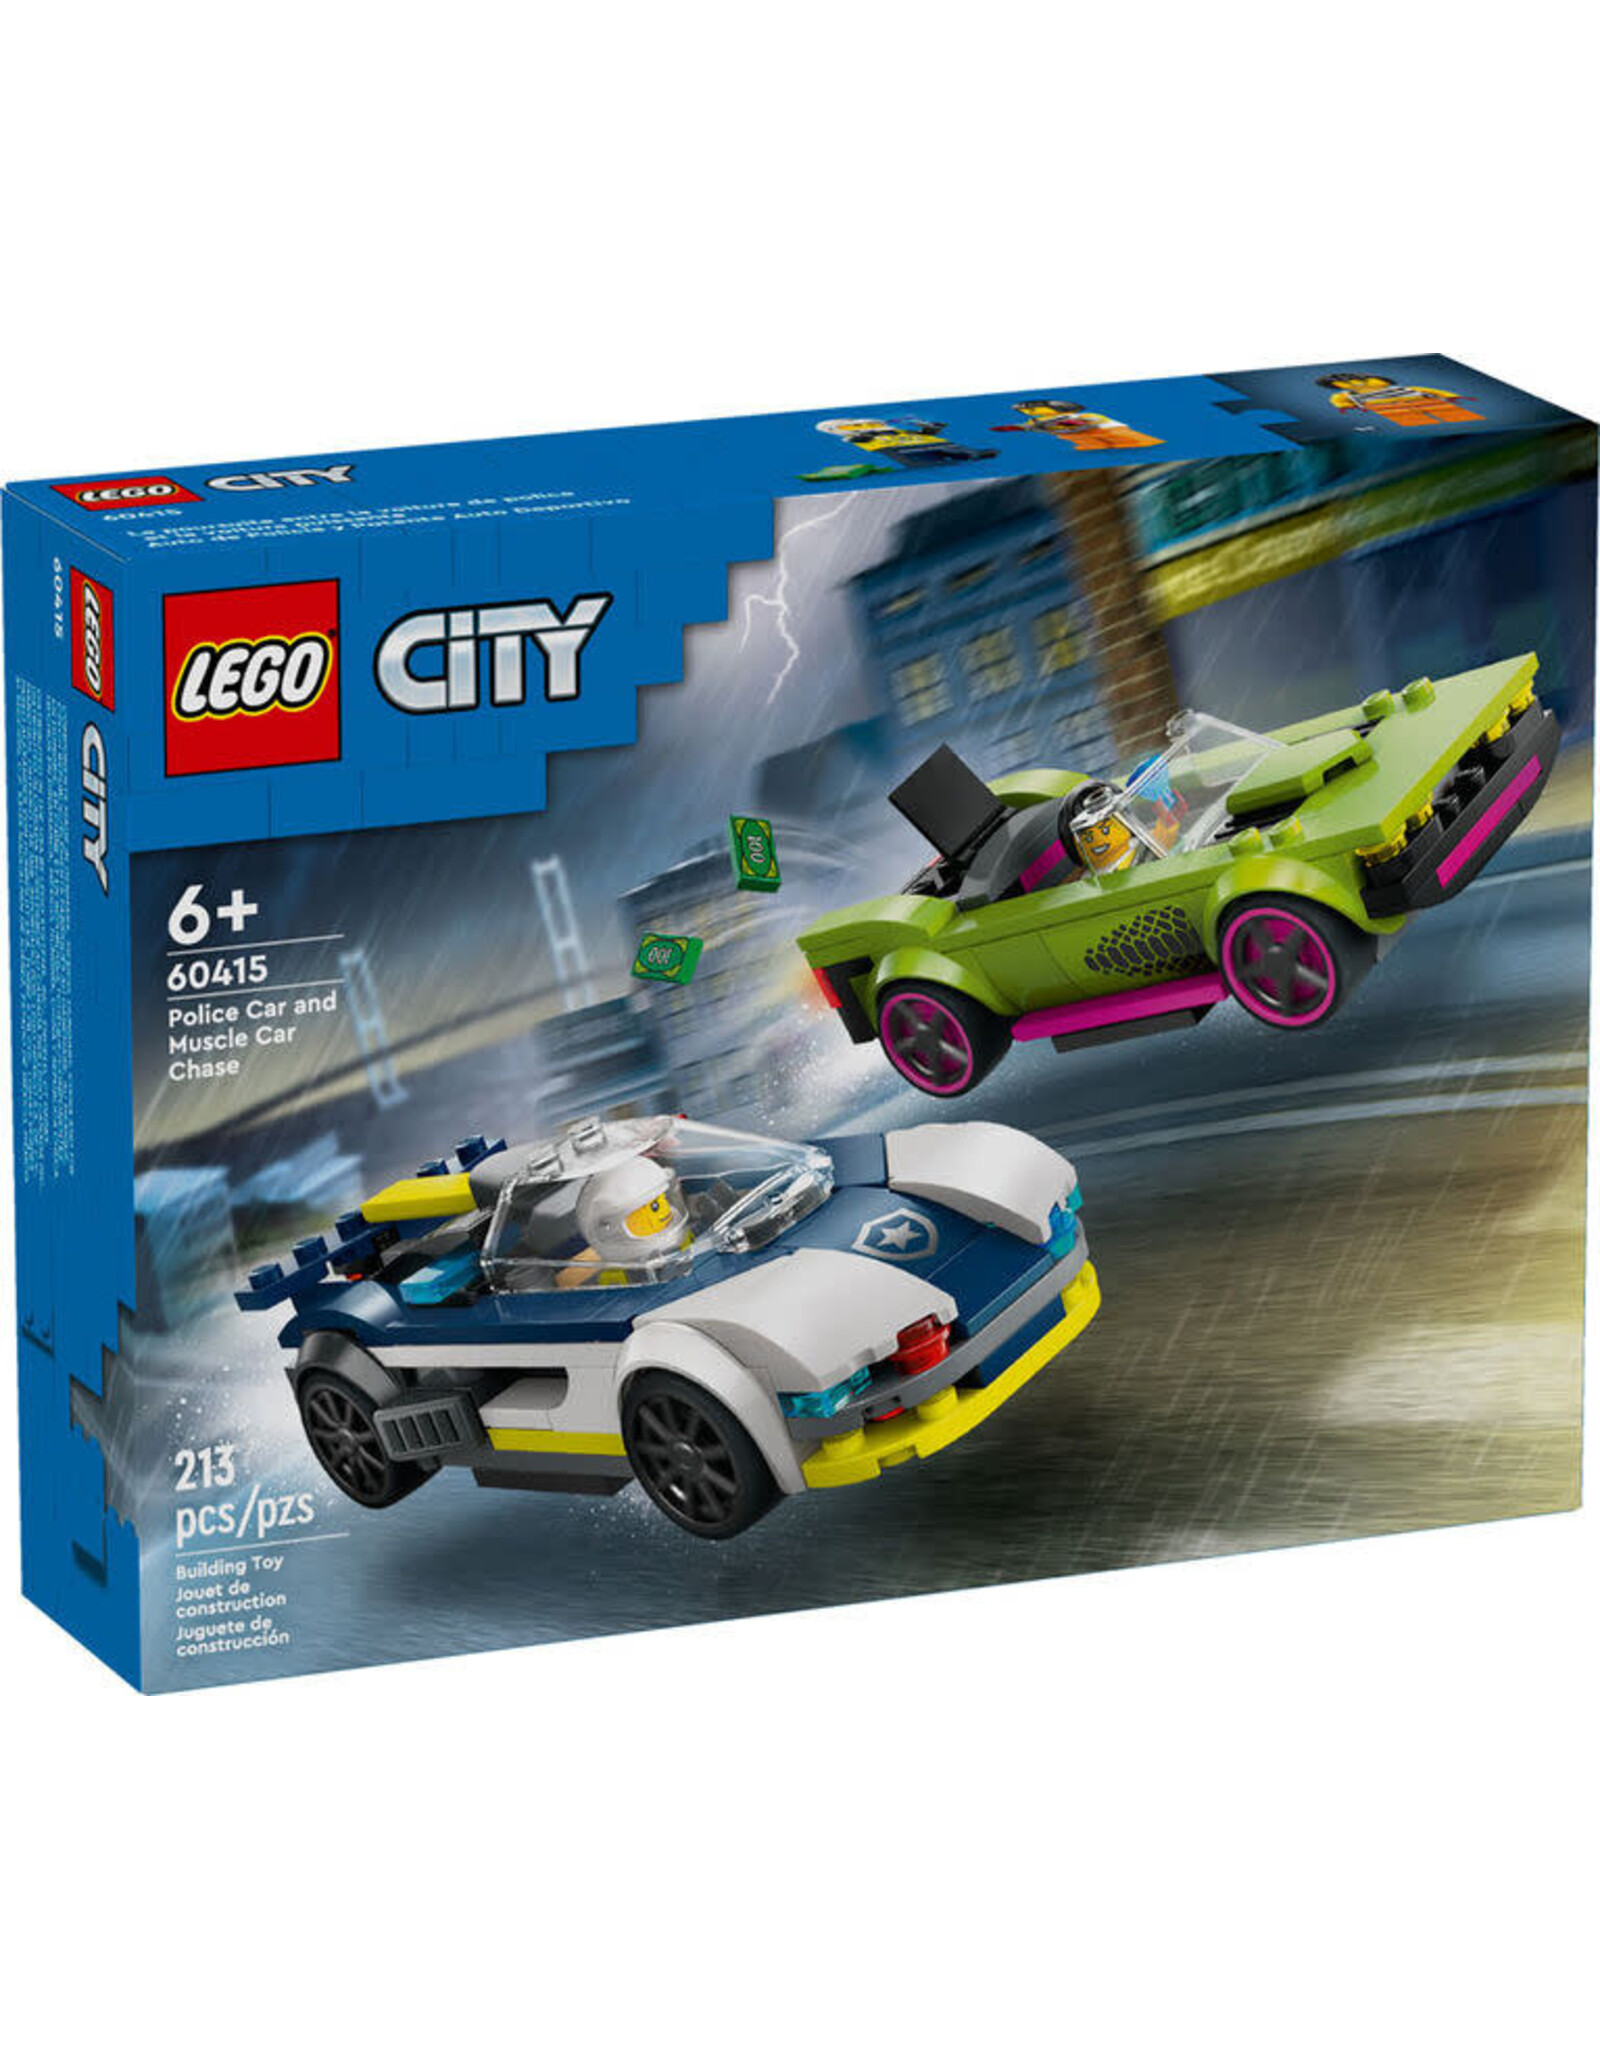 Lego Police Car and Muscle Car Chase